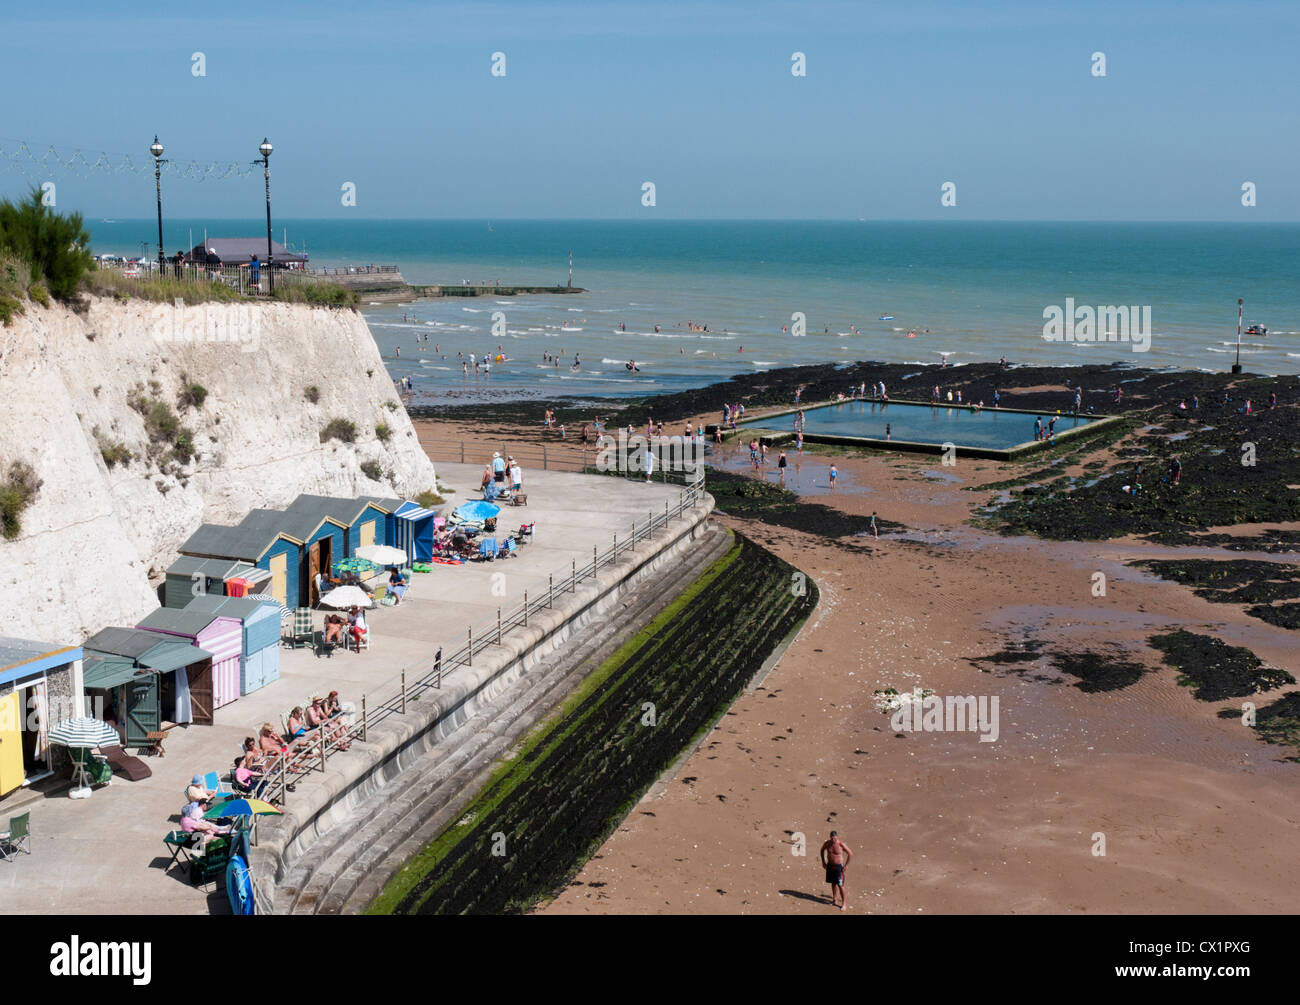 Louisa Bay à Broadstairs, Kent, Angleterre Banque D'Images